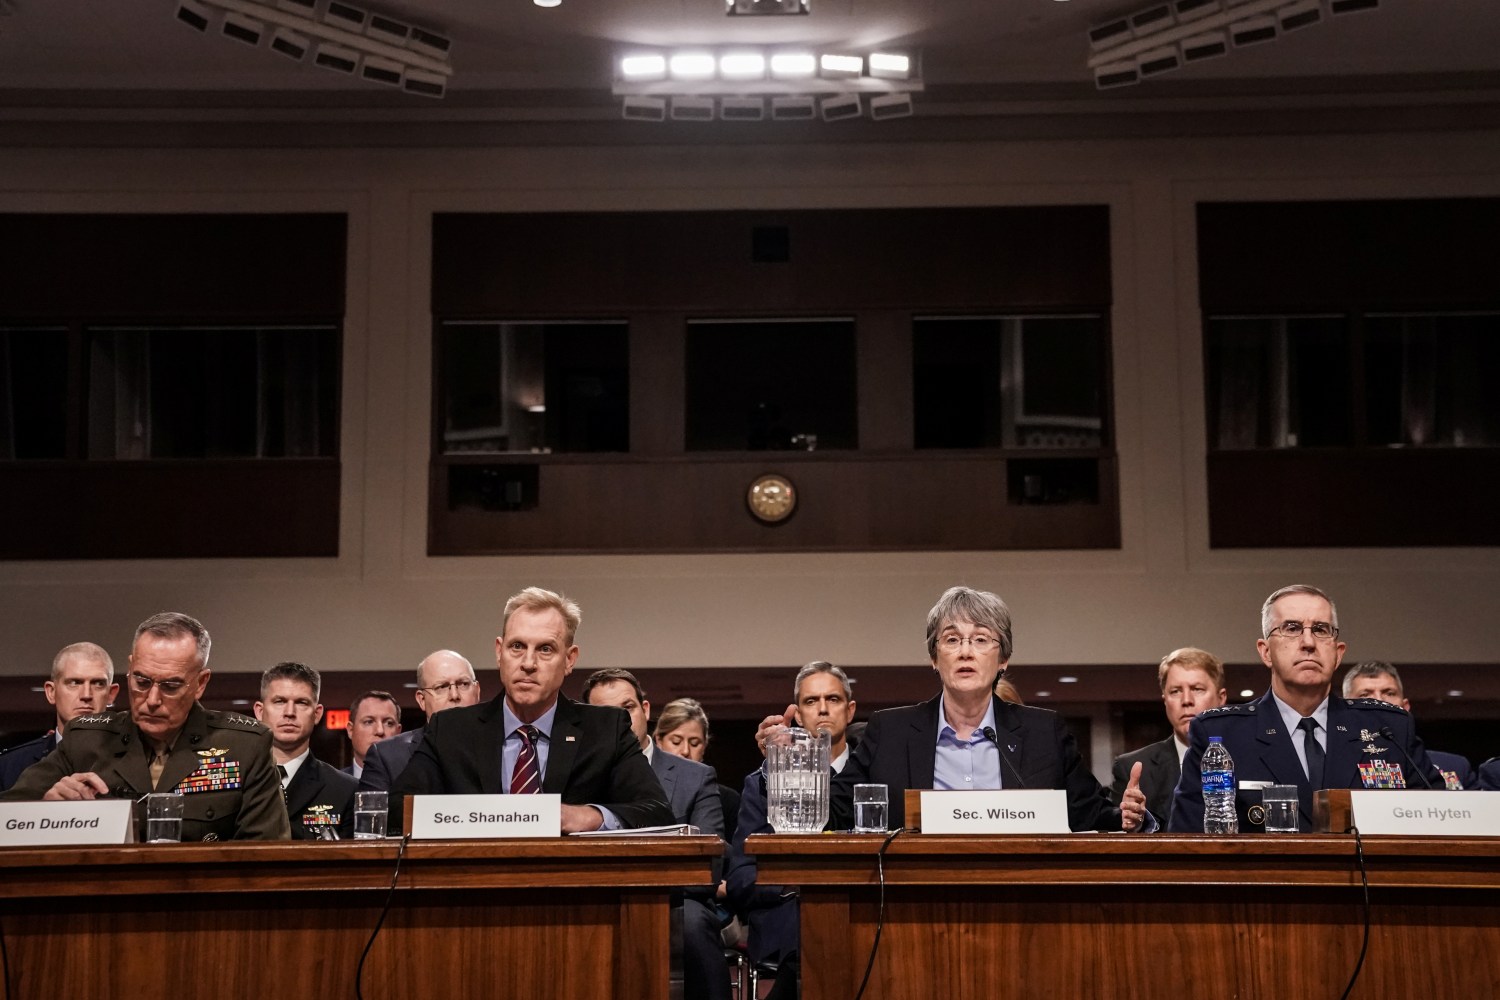 Chairman of the Joint Chiefs of Staff Gen. Joseph F. Dunford Jr., Acting Defense Secretary Patrick Shanahan, Secretary of the Air Force Heather Wilson and Air Force Gen. John E. Hyten testify at a Senate Armed Services hearing on the proposal to establish a U.S. Space Force, in Washington, U.S., April 11, 2019. REUTERS/Jeenah Moon - RC14348BC2E0